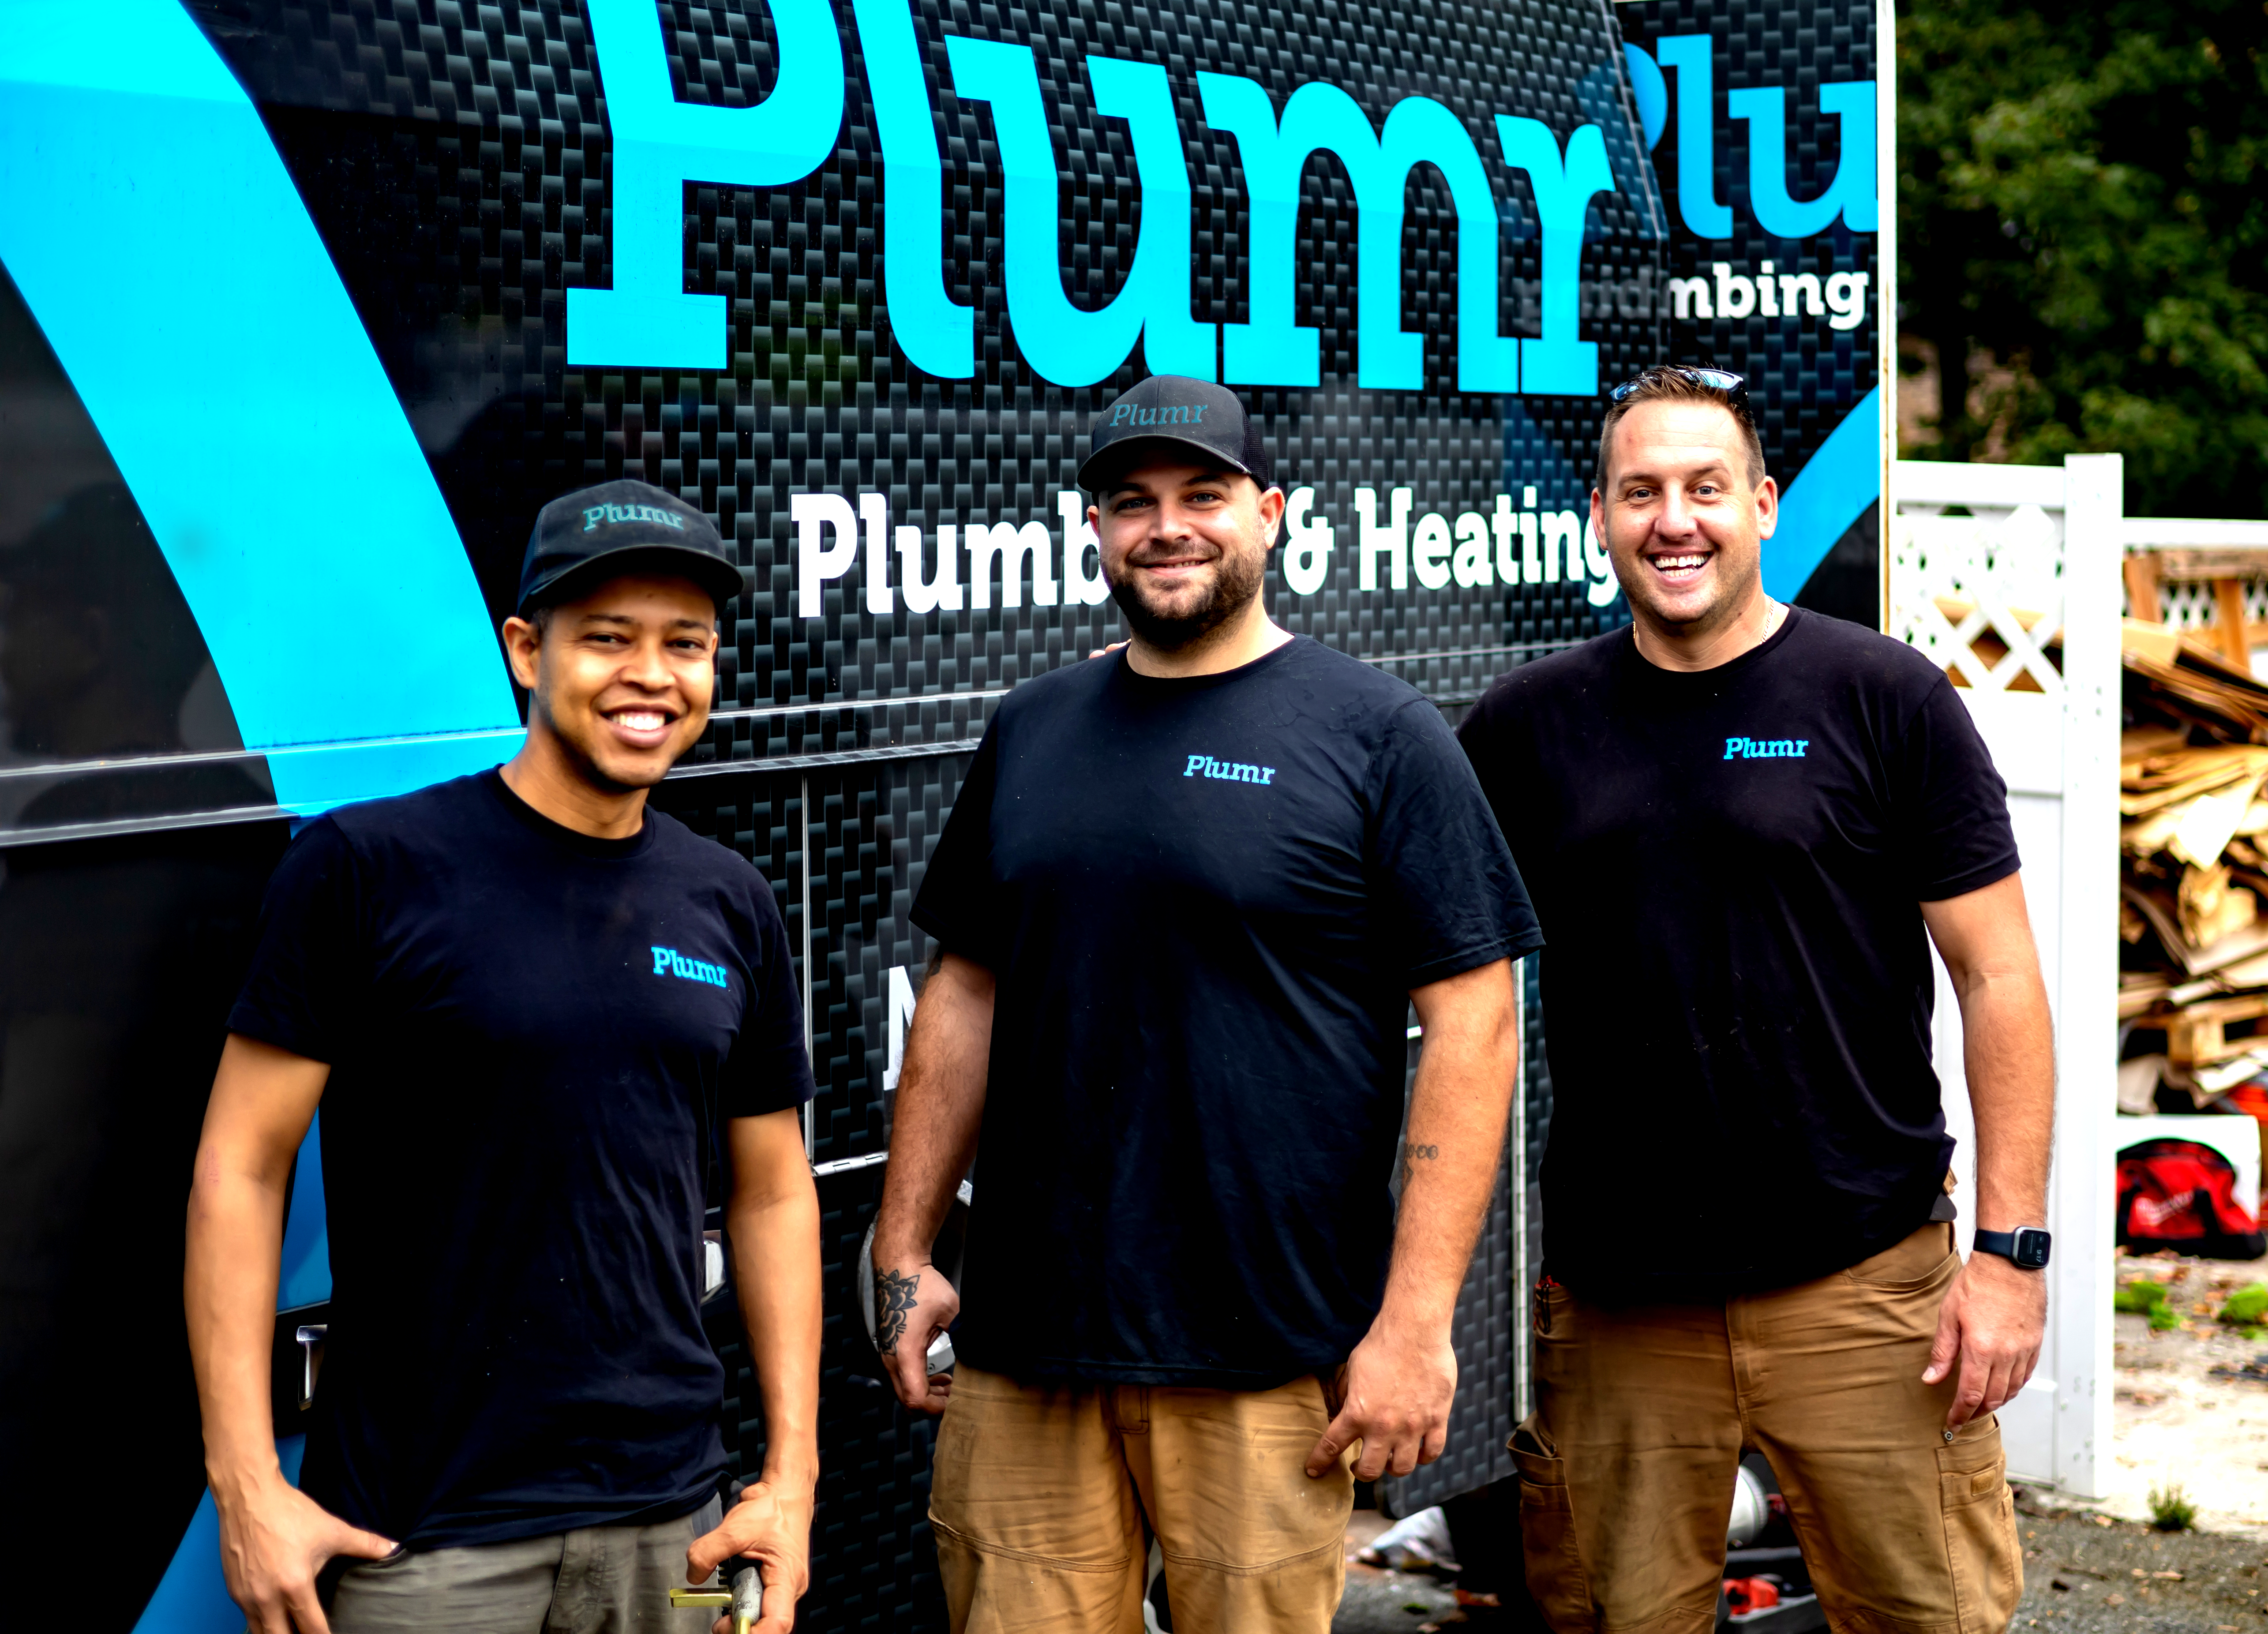 Plumbing Services in Beverly MA